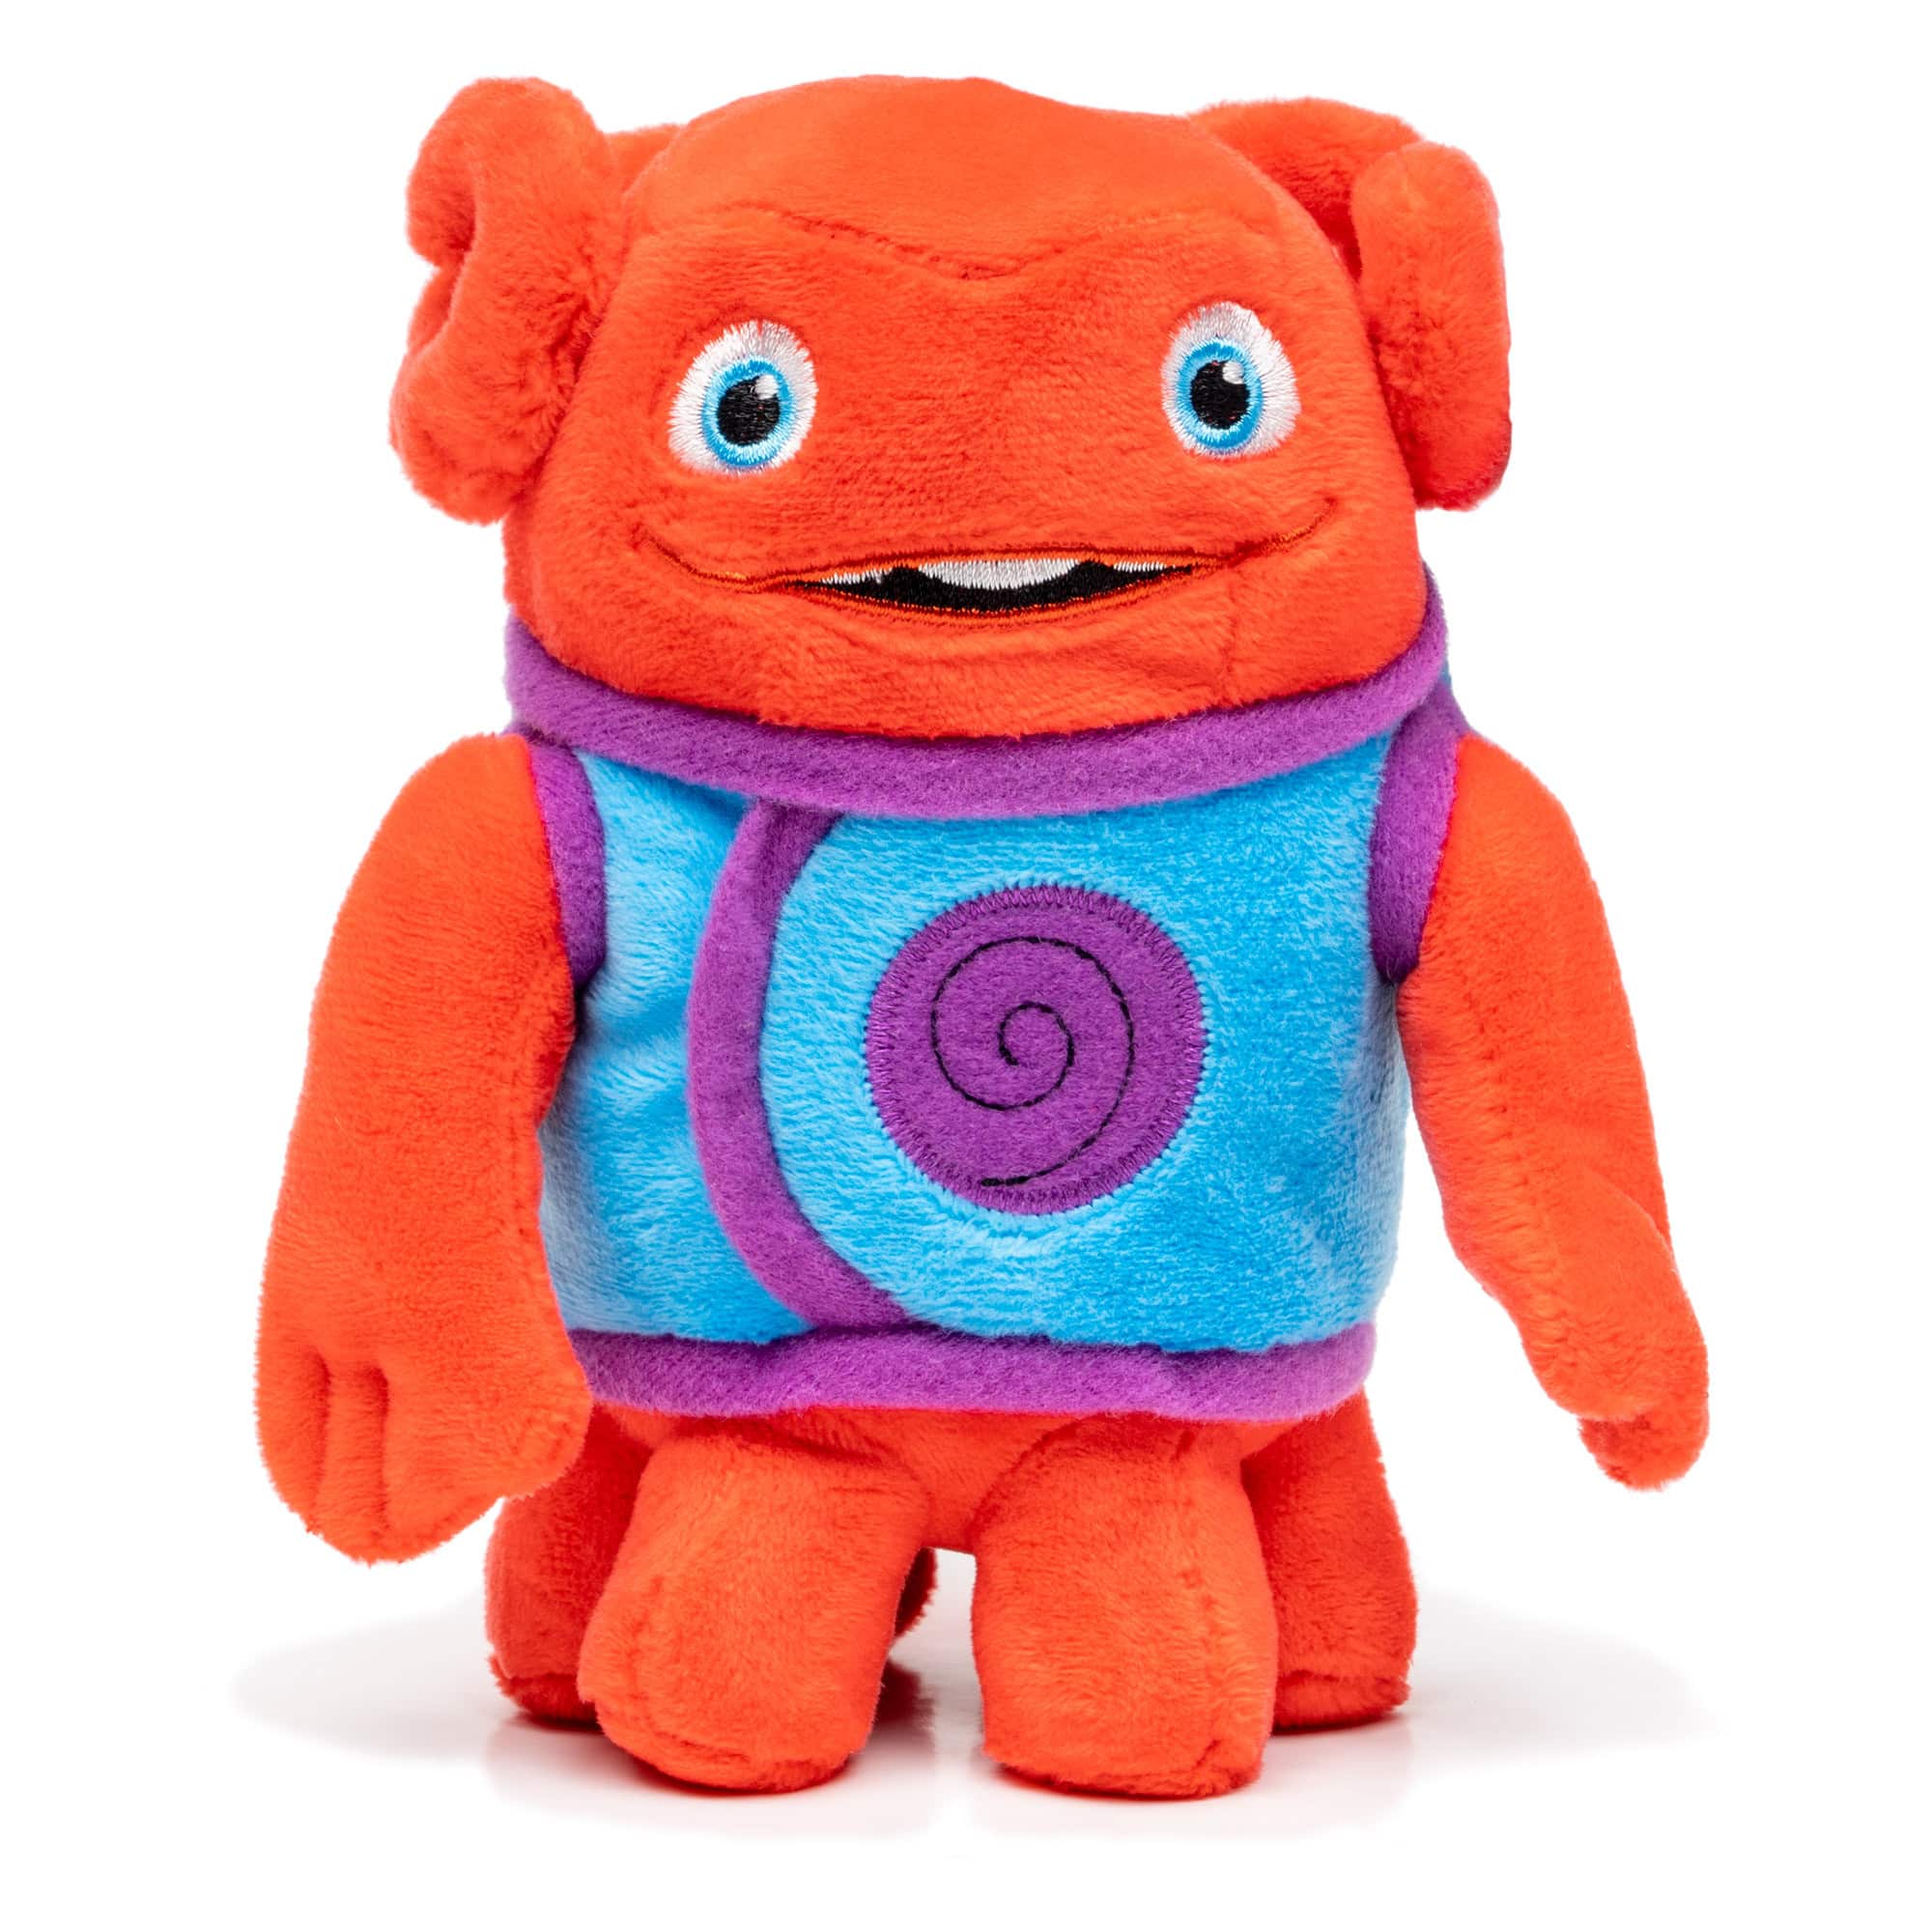 DreamWorks Home - Red Oh 6-Inch Plush